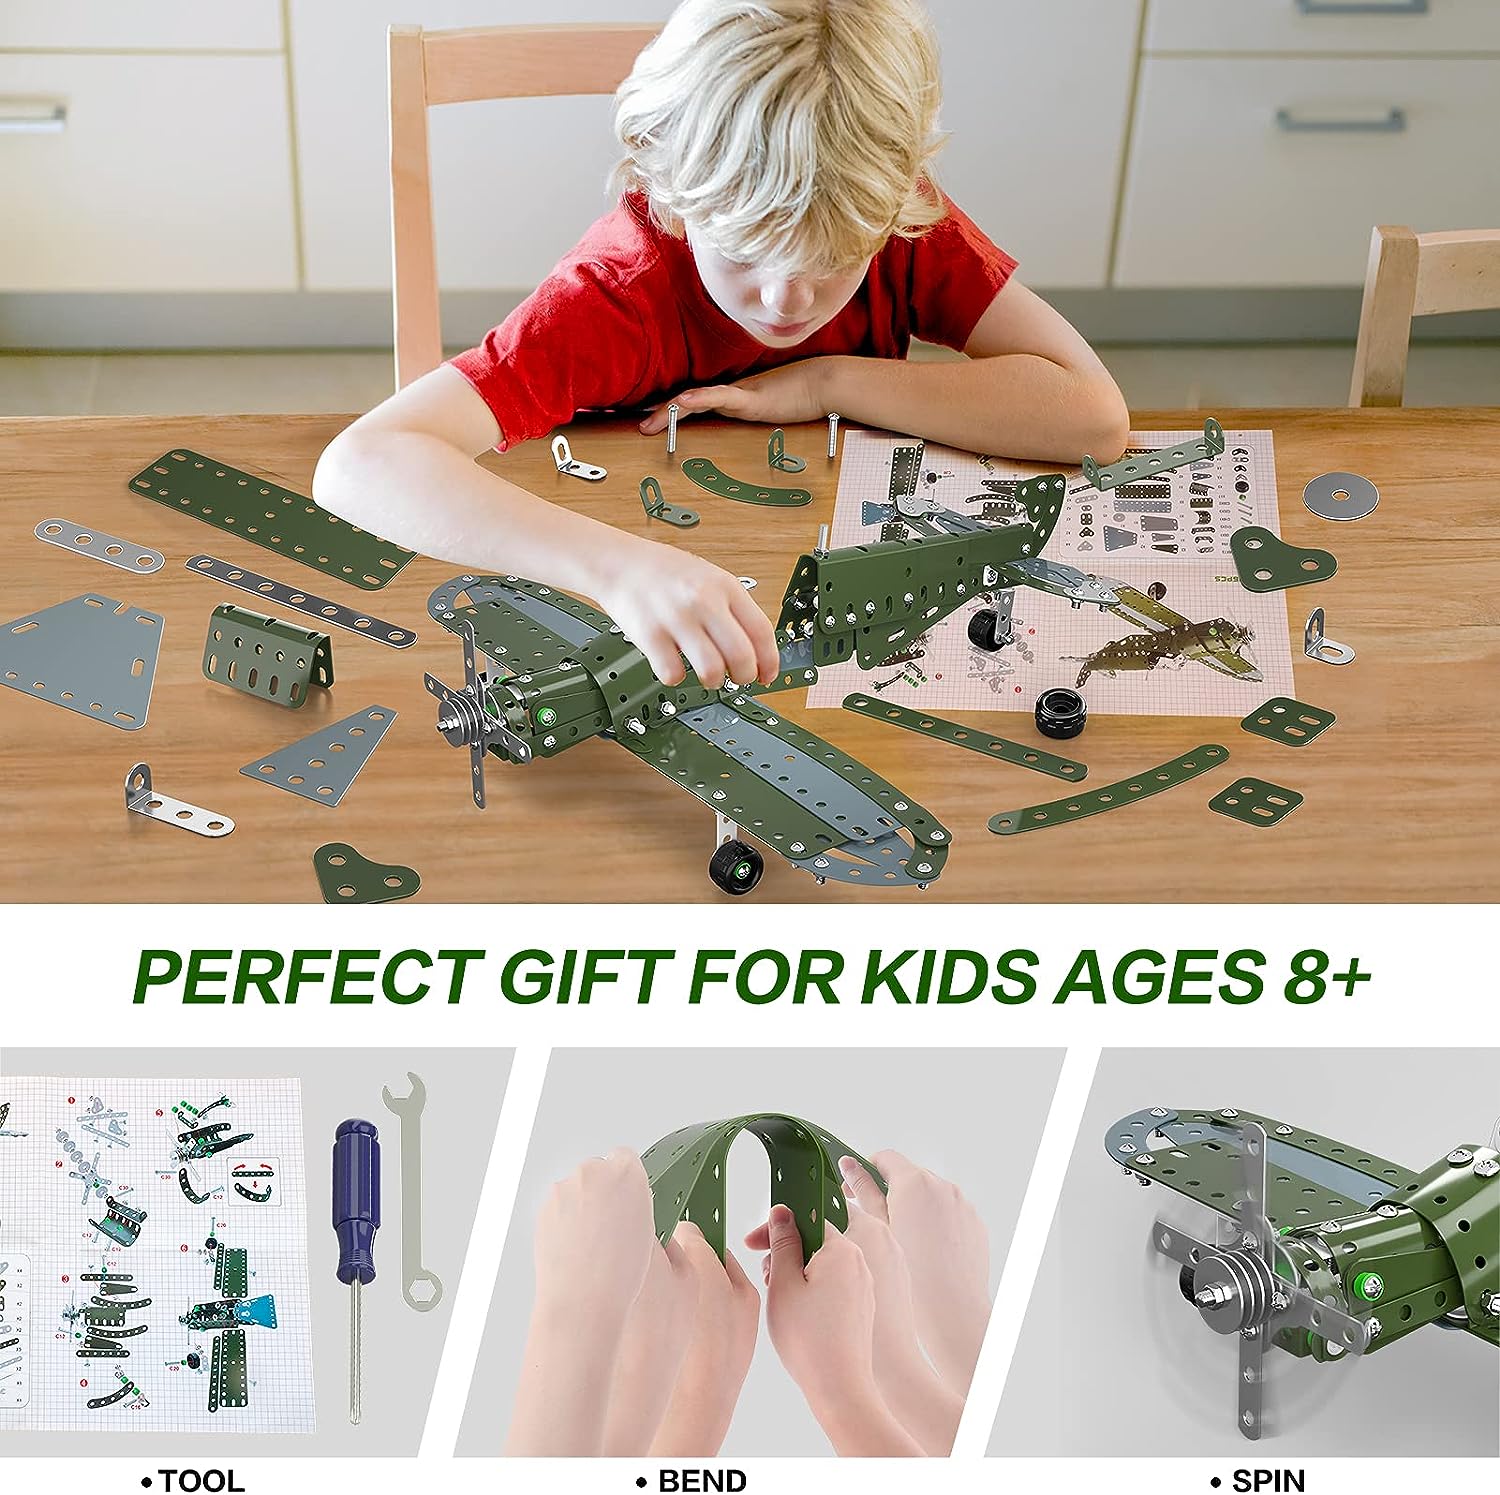 Lucky Doug Building Toys Airplane Model Set -258 Pieces DIY Building Stem Projects Toys for Kids Boys Ages 8-12 and Older,Building Assembly Science Educational Toys Set Gifts for Model Aircraft Fan : Toys Games